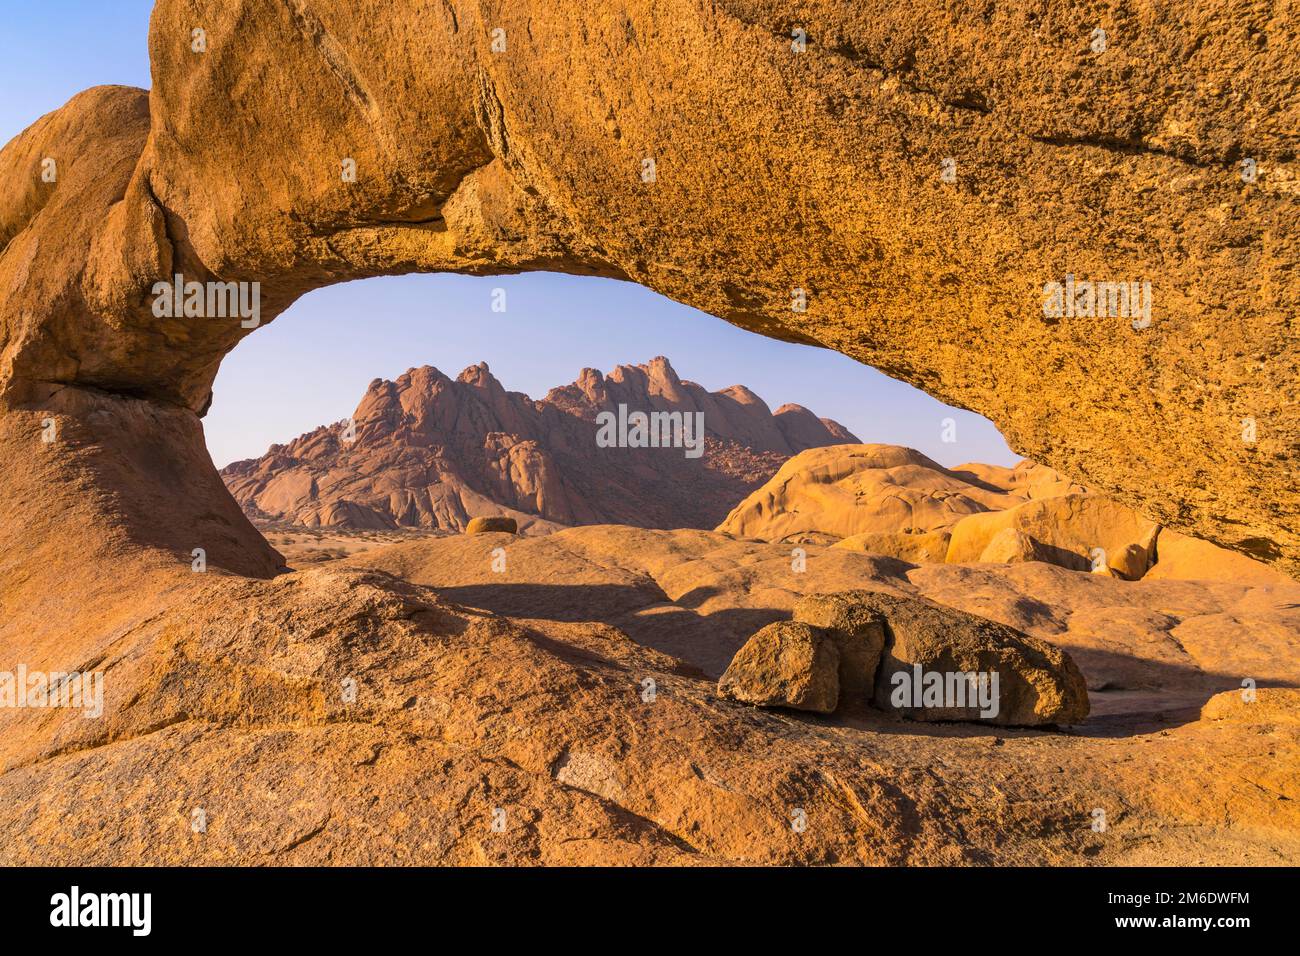 Rock arch in the Spitzkoppe National Park in Namibia. Stock Photo